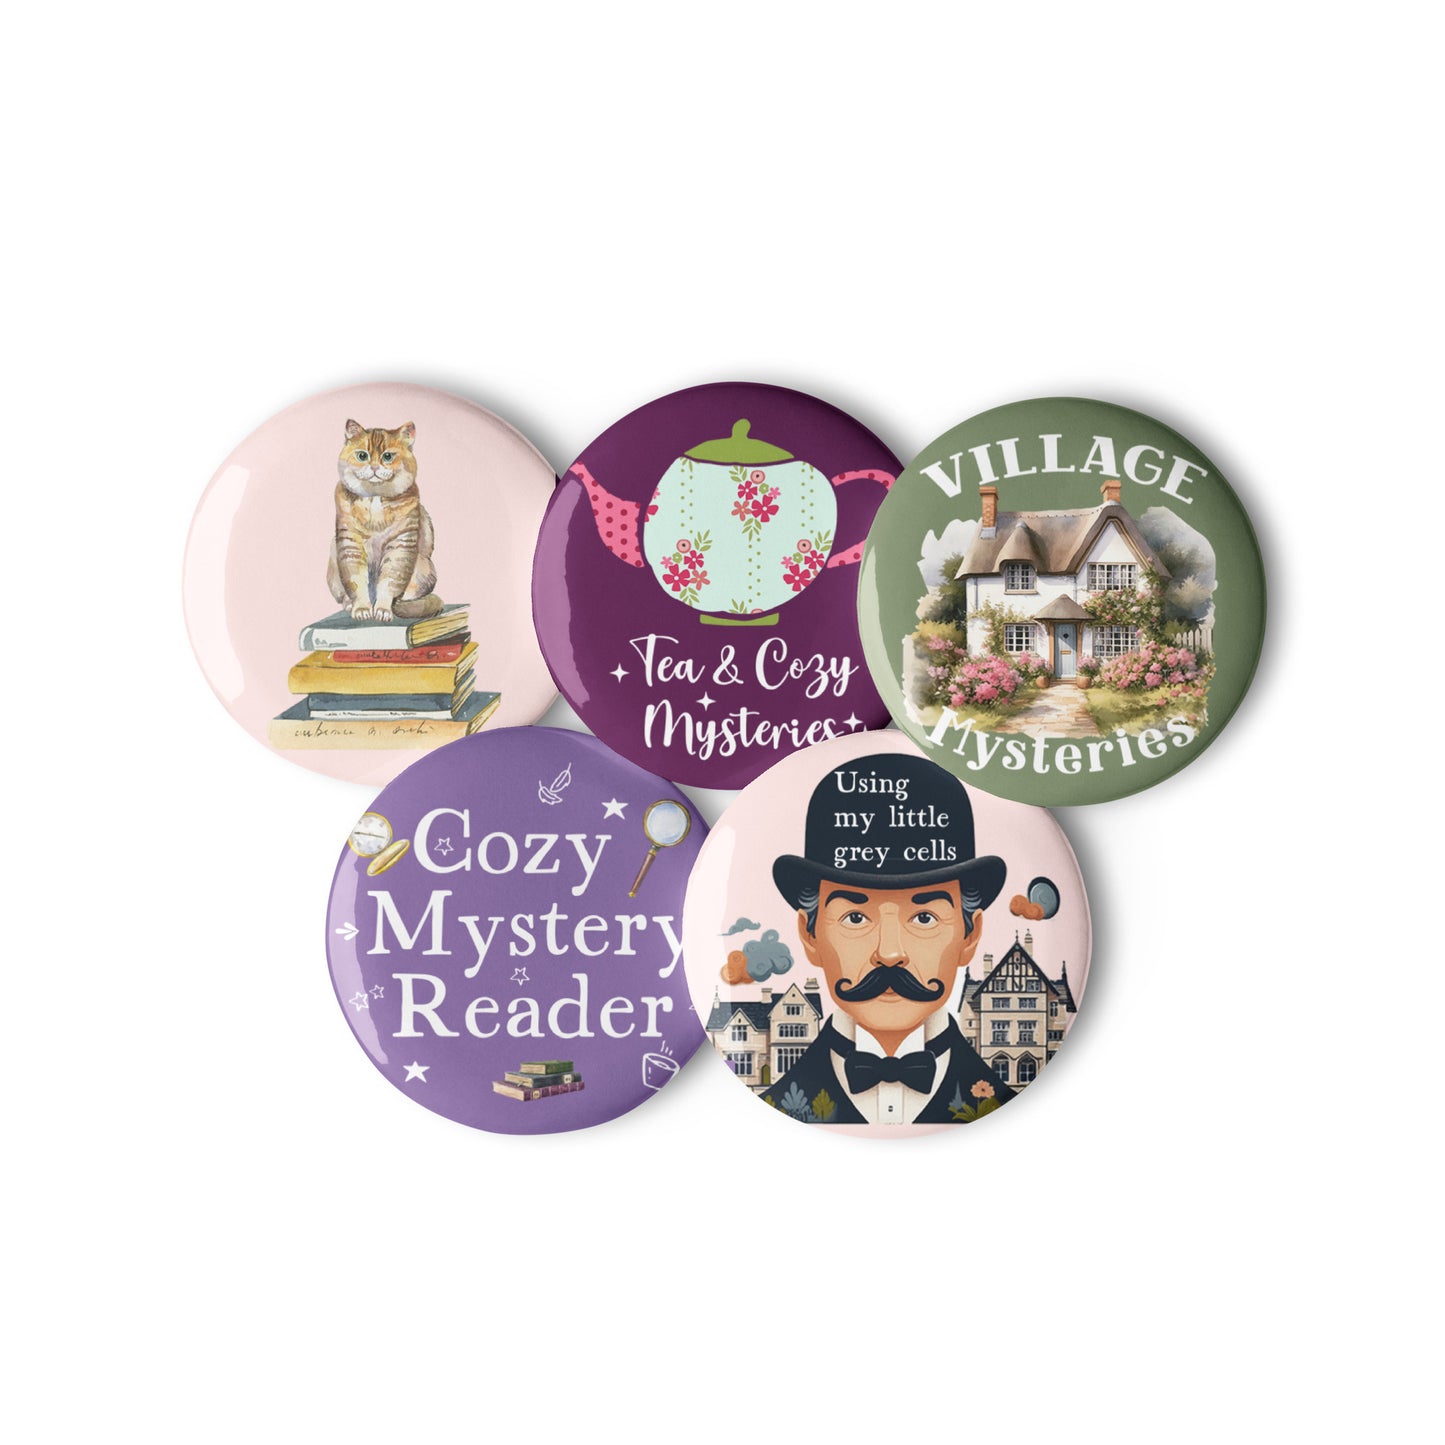 Mystery Reader's Pin Buttons